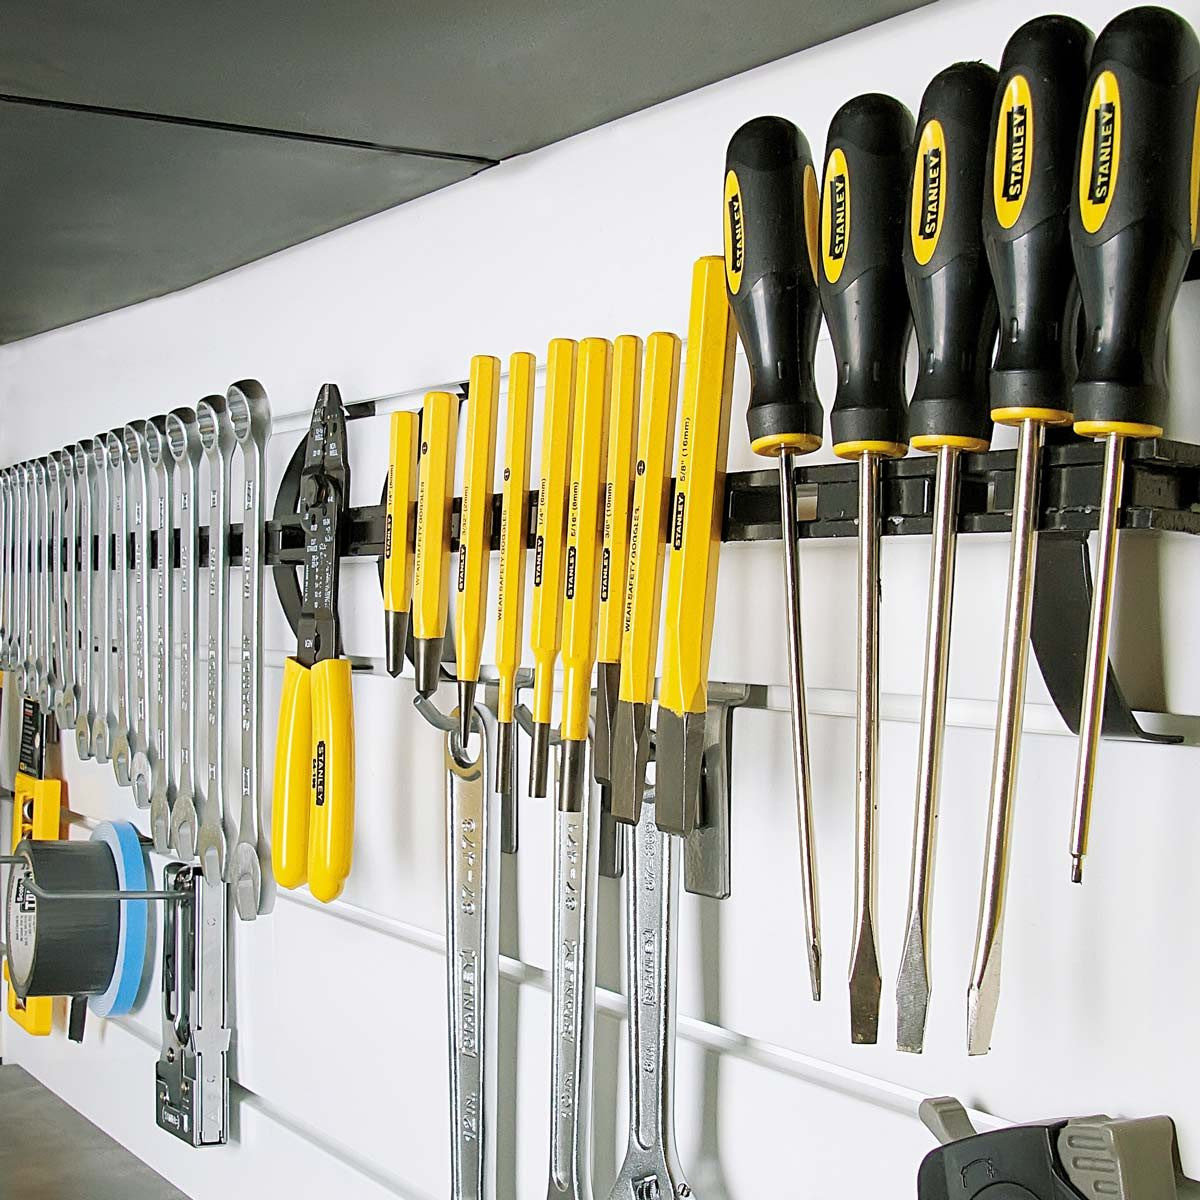 Organize Tools In Garage
 10 Tips for Organizing Your Garage and Keeping It Organized